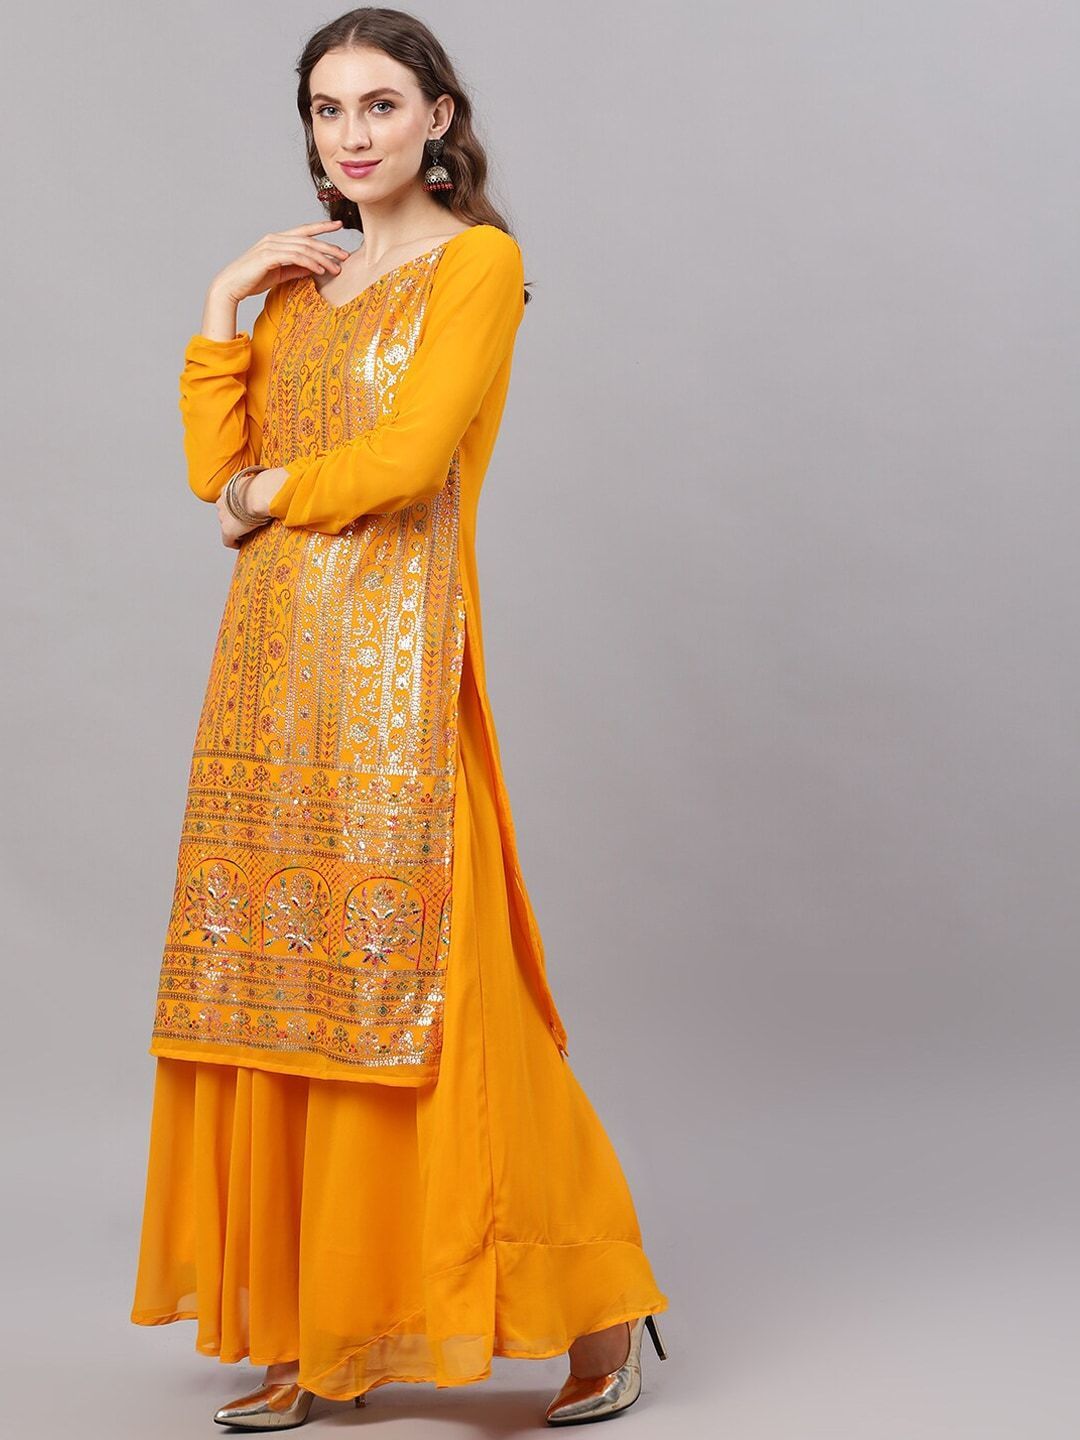 Women's  Yellow & Gold-Toned Embroidered Made To Measure Kurta with Palazzos - AKS